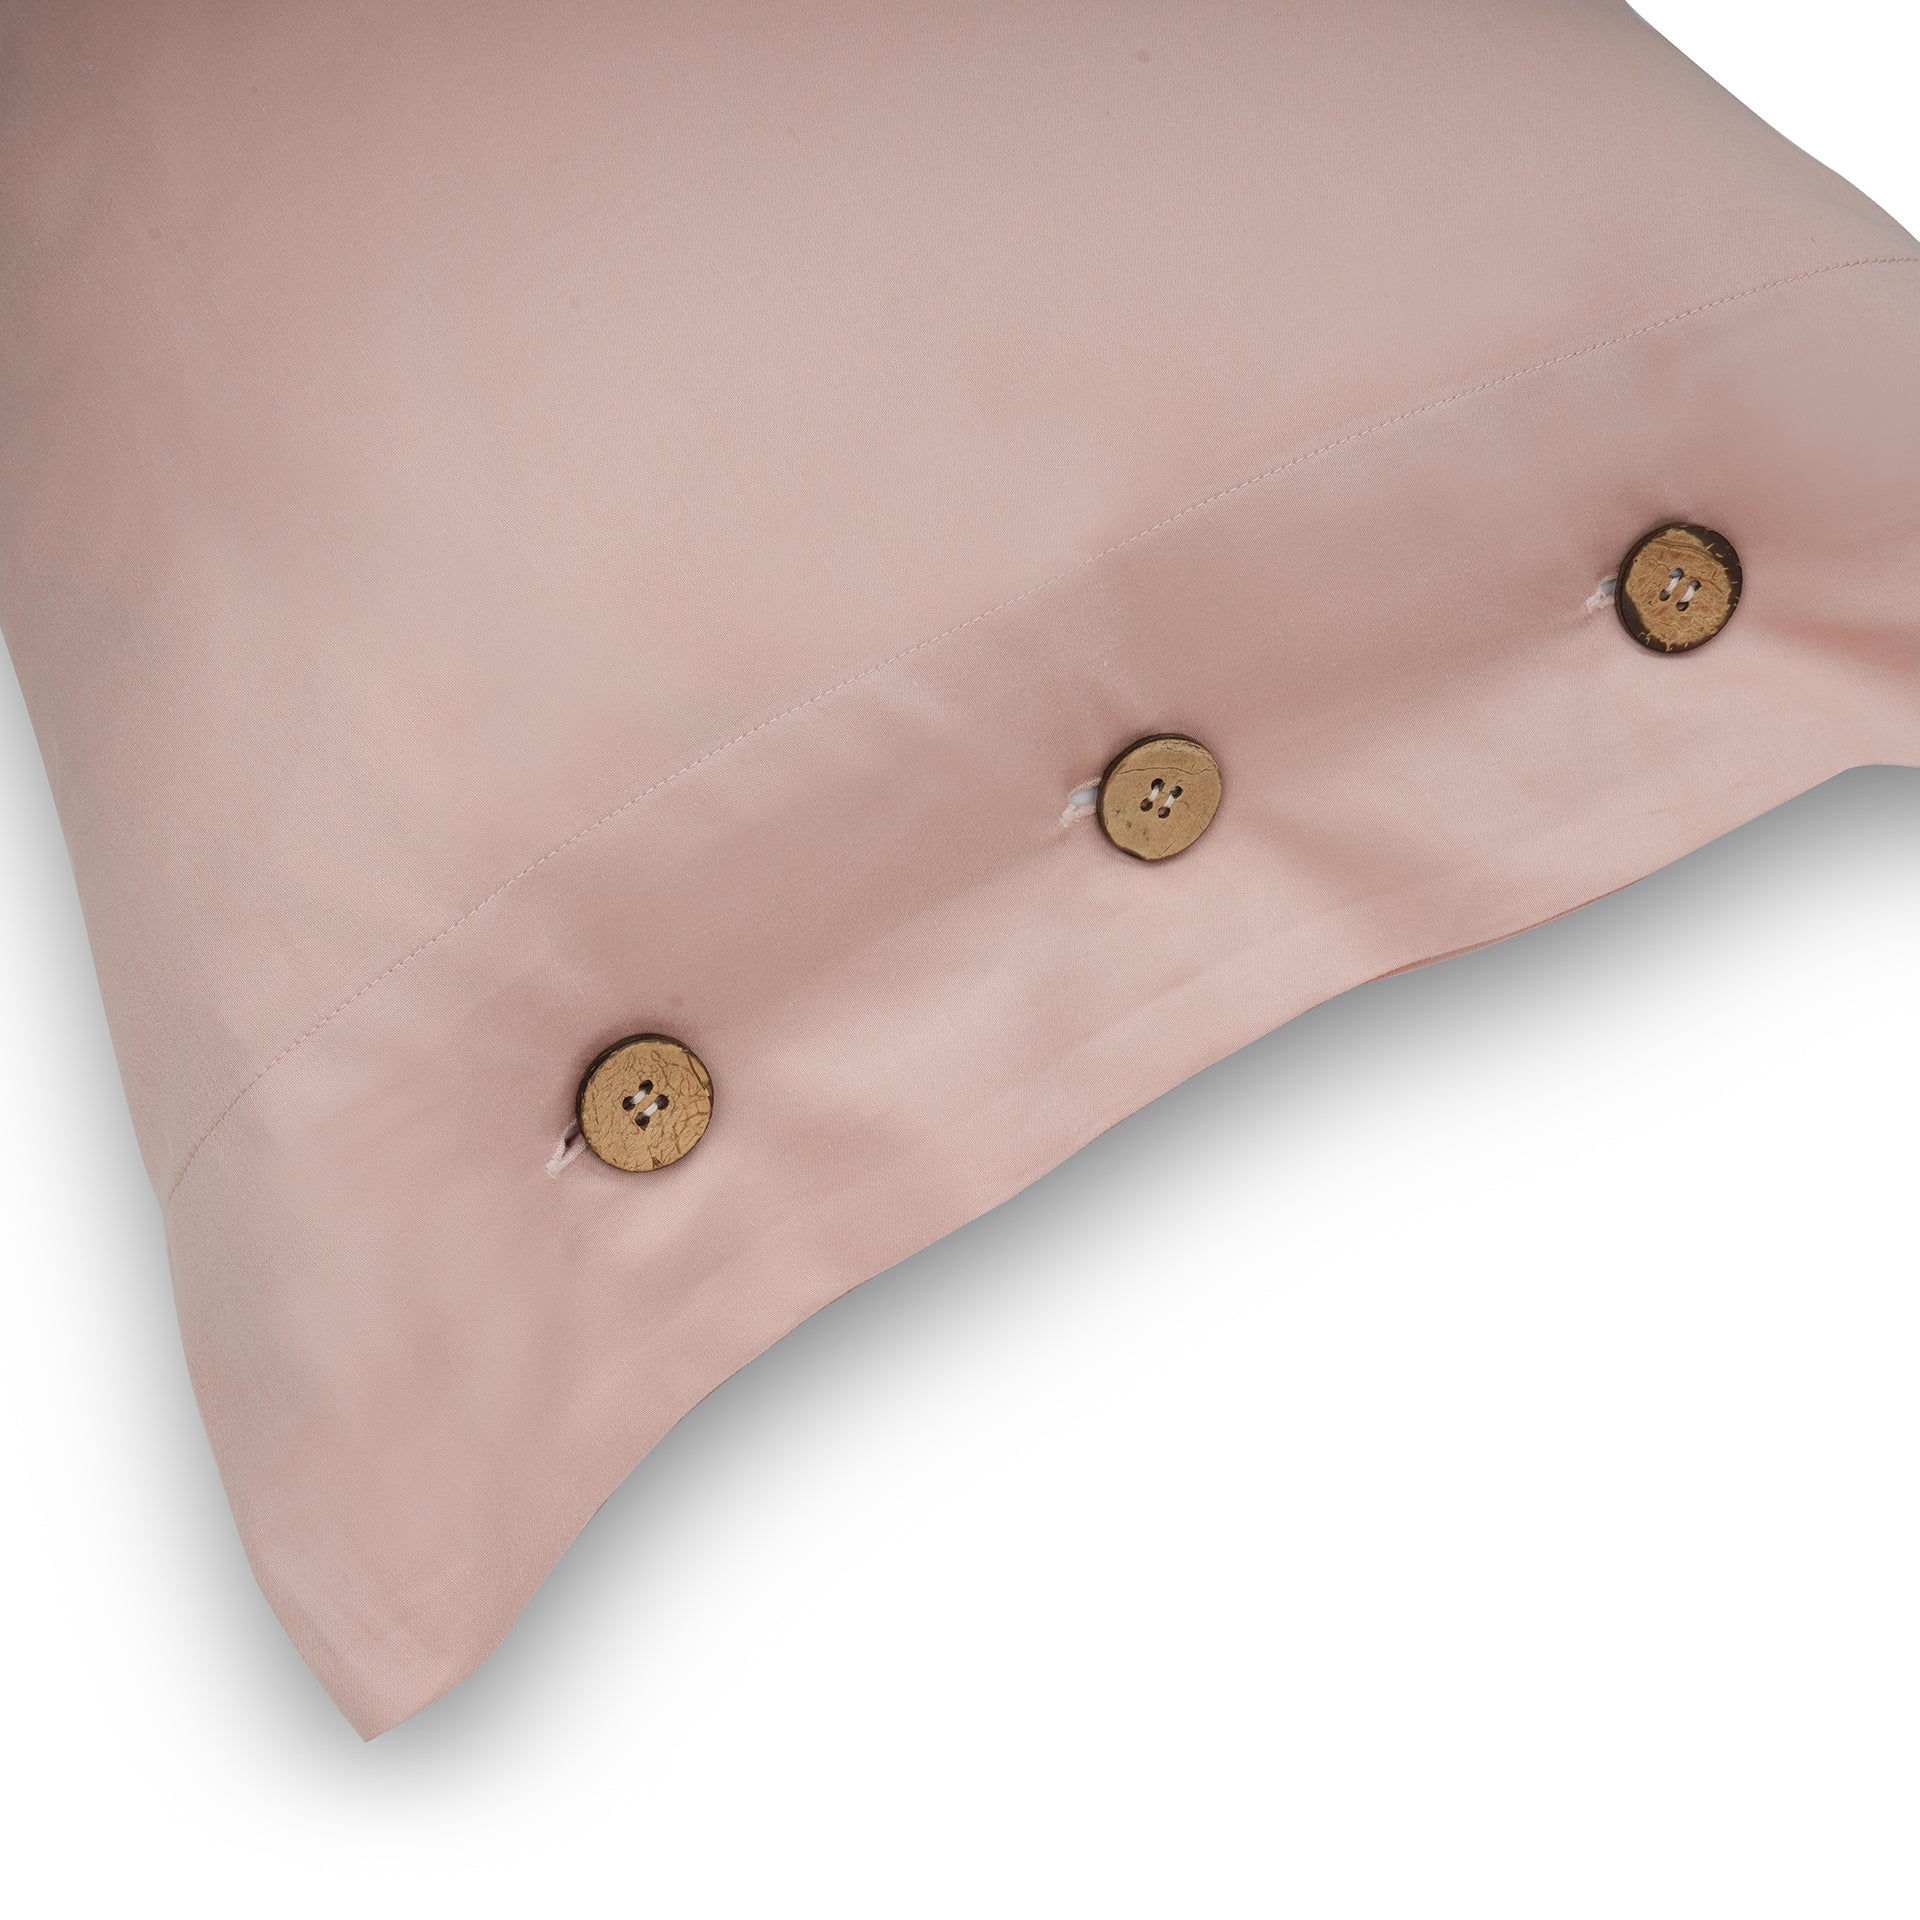 Buttoned Bedding Set - Coral Peach